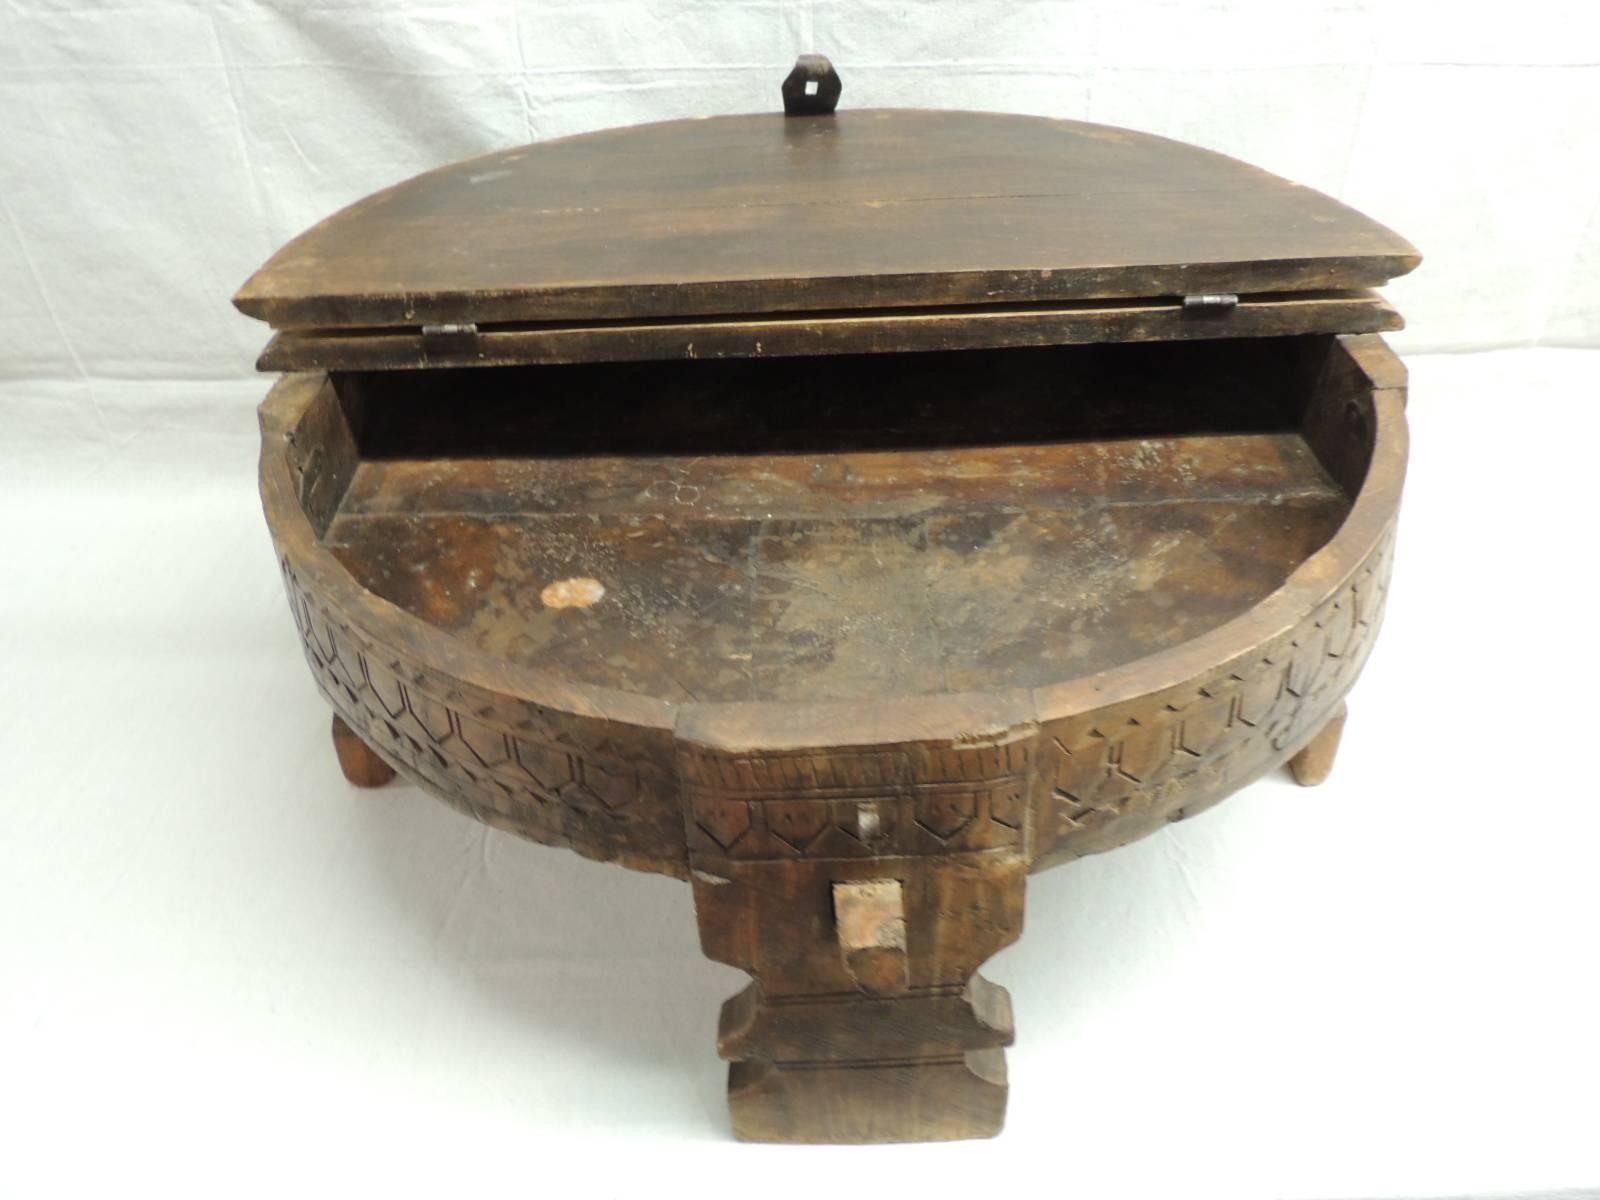 Moroccan wood carved coffee table with lid and original rusted hardware. Apron and legs are hand-carved.
27.5” D x 13” H.
     